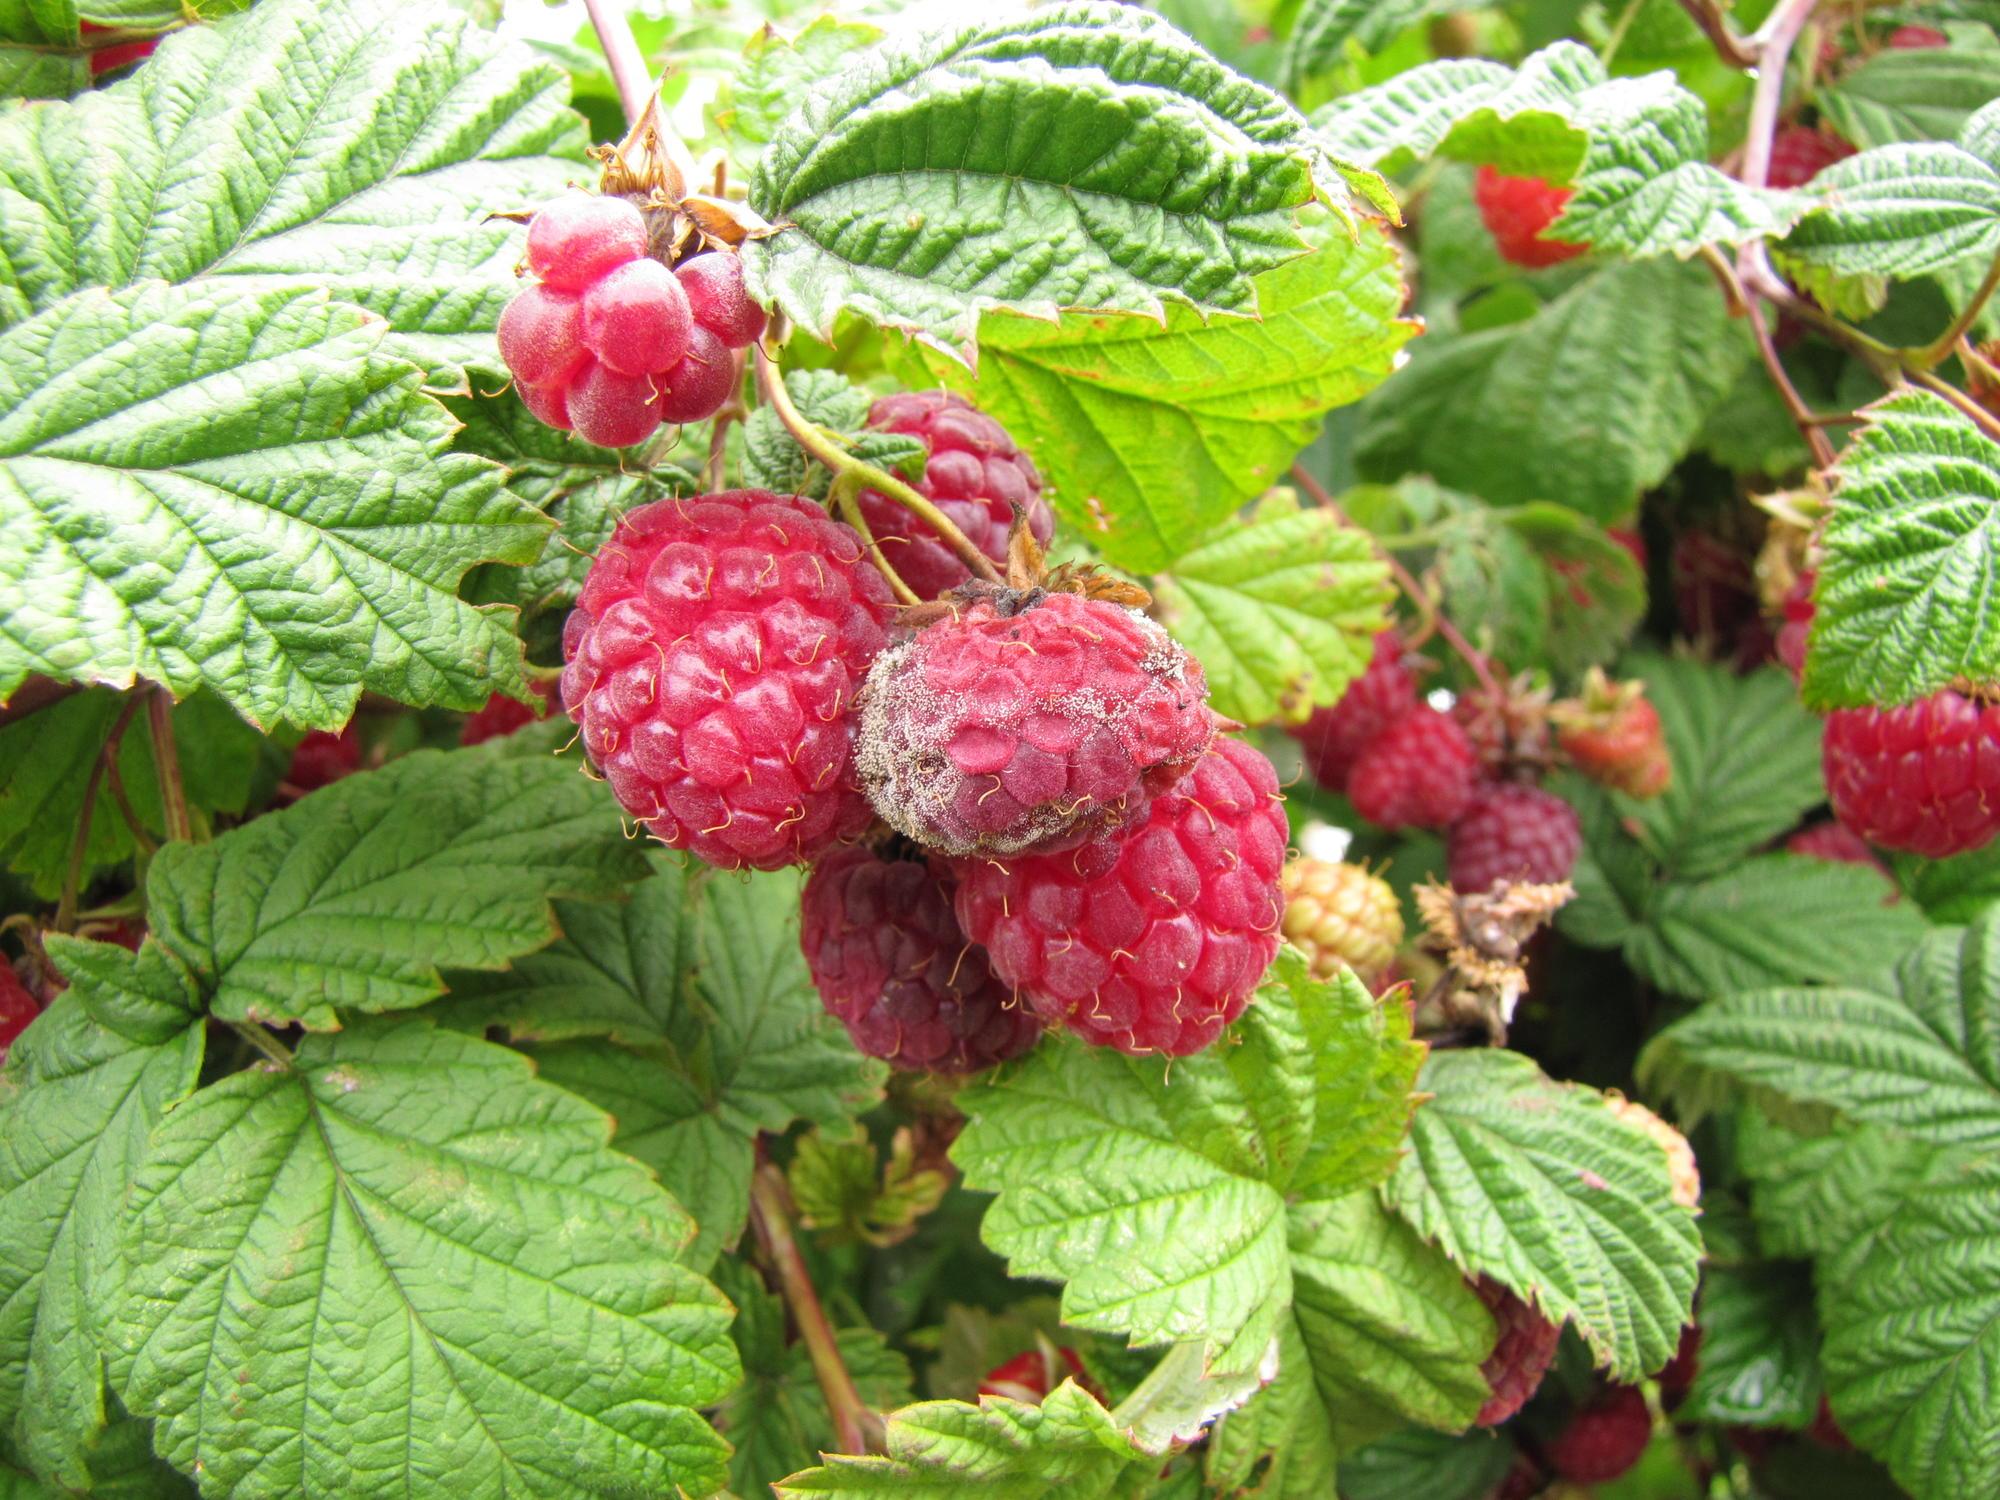 Growing Raspberries | Service Garden in Home Your OSU Extension